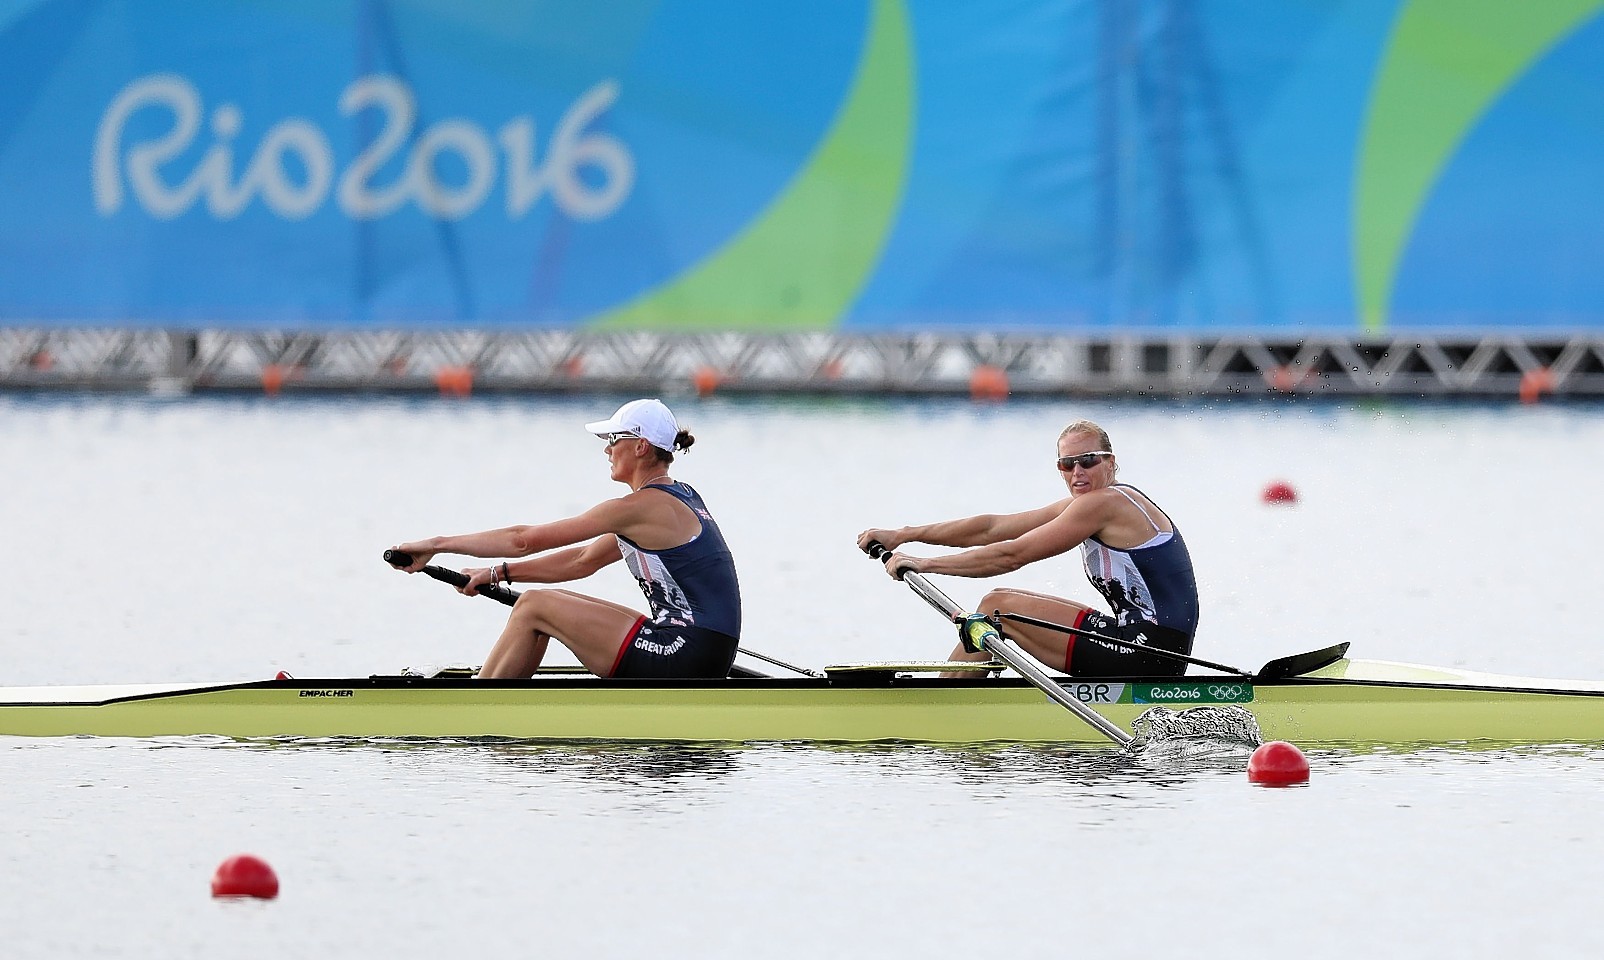 Heather Stanning and Helen Glover stormed to gold.